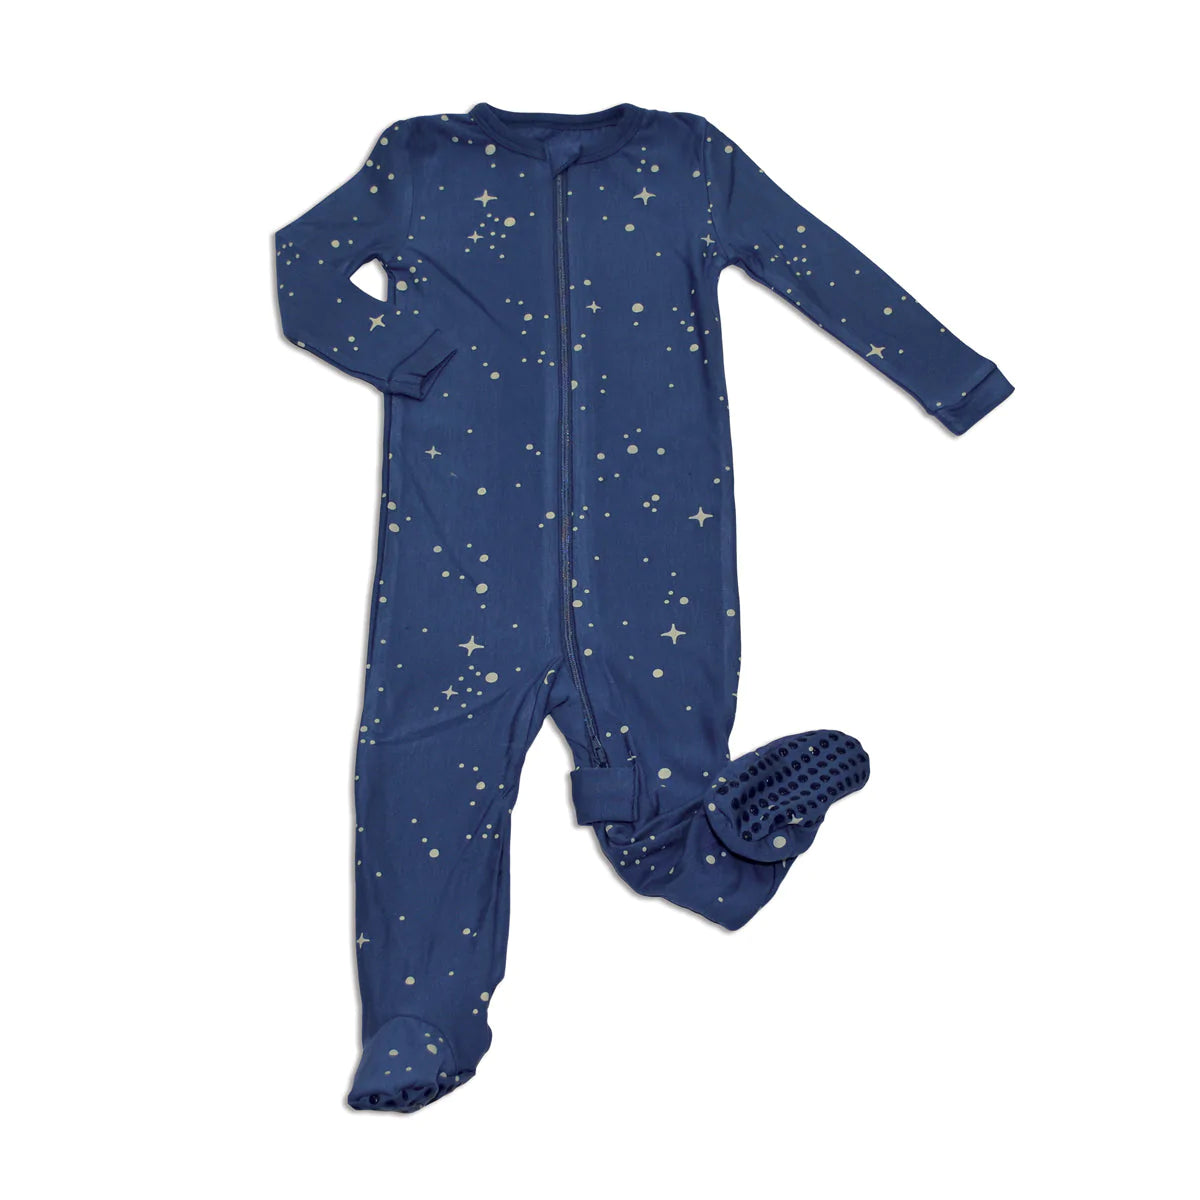 Silkberry Bamboo Printed Footies with Easy Dressing Zipper